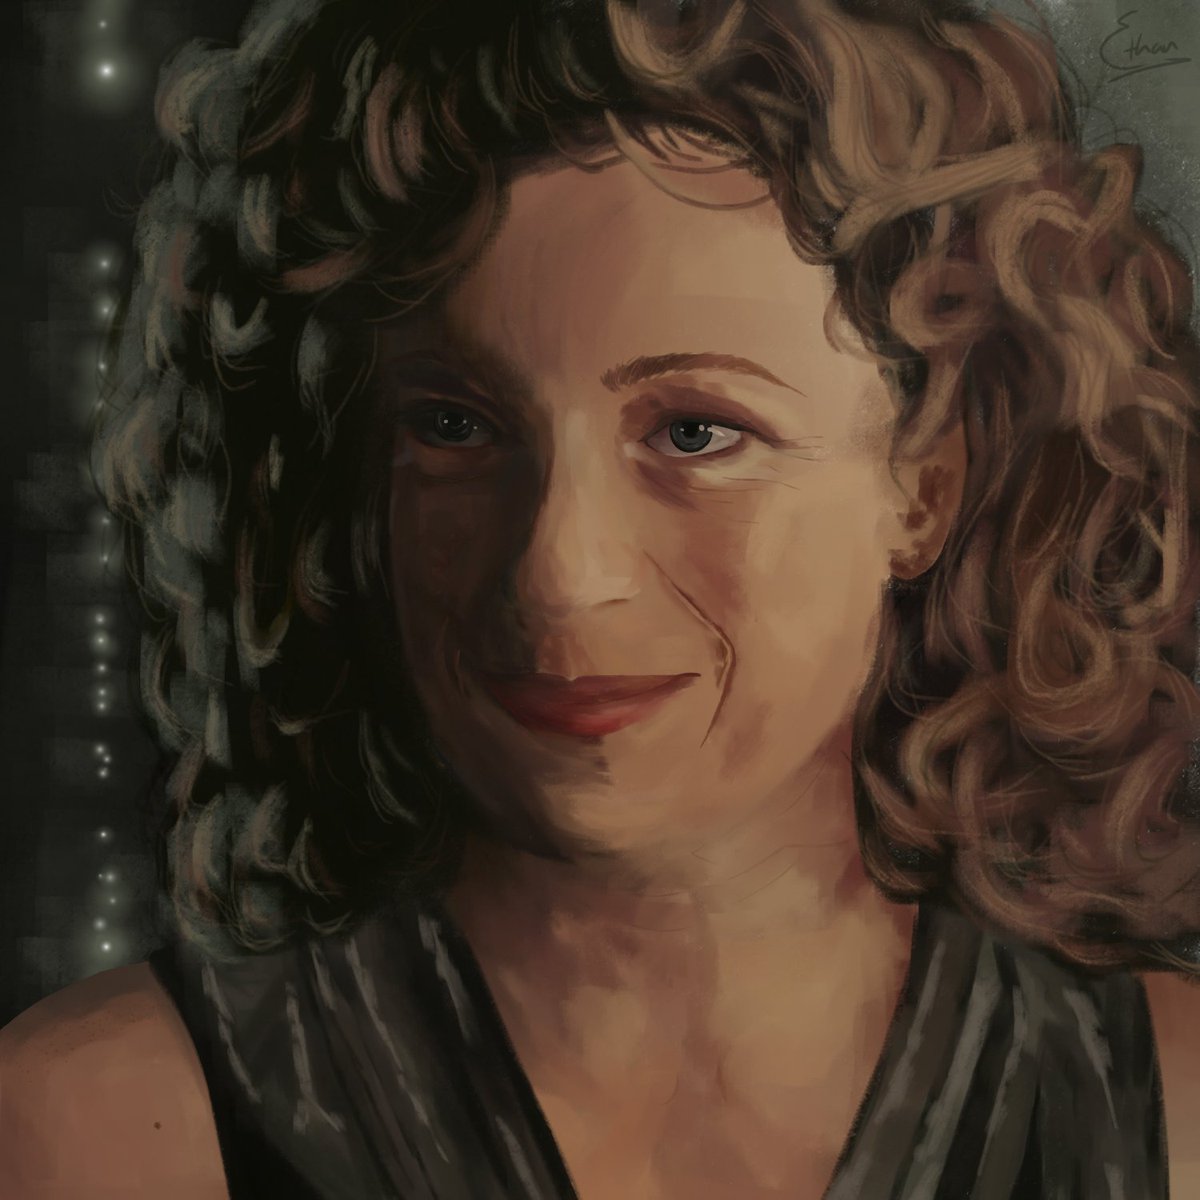 ... i think i finally did her justice <3
(2 hours 17 mins)
#DoctorWho #DoctorWhoFanart #RiverSong